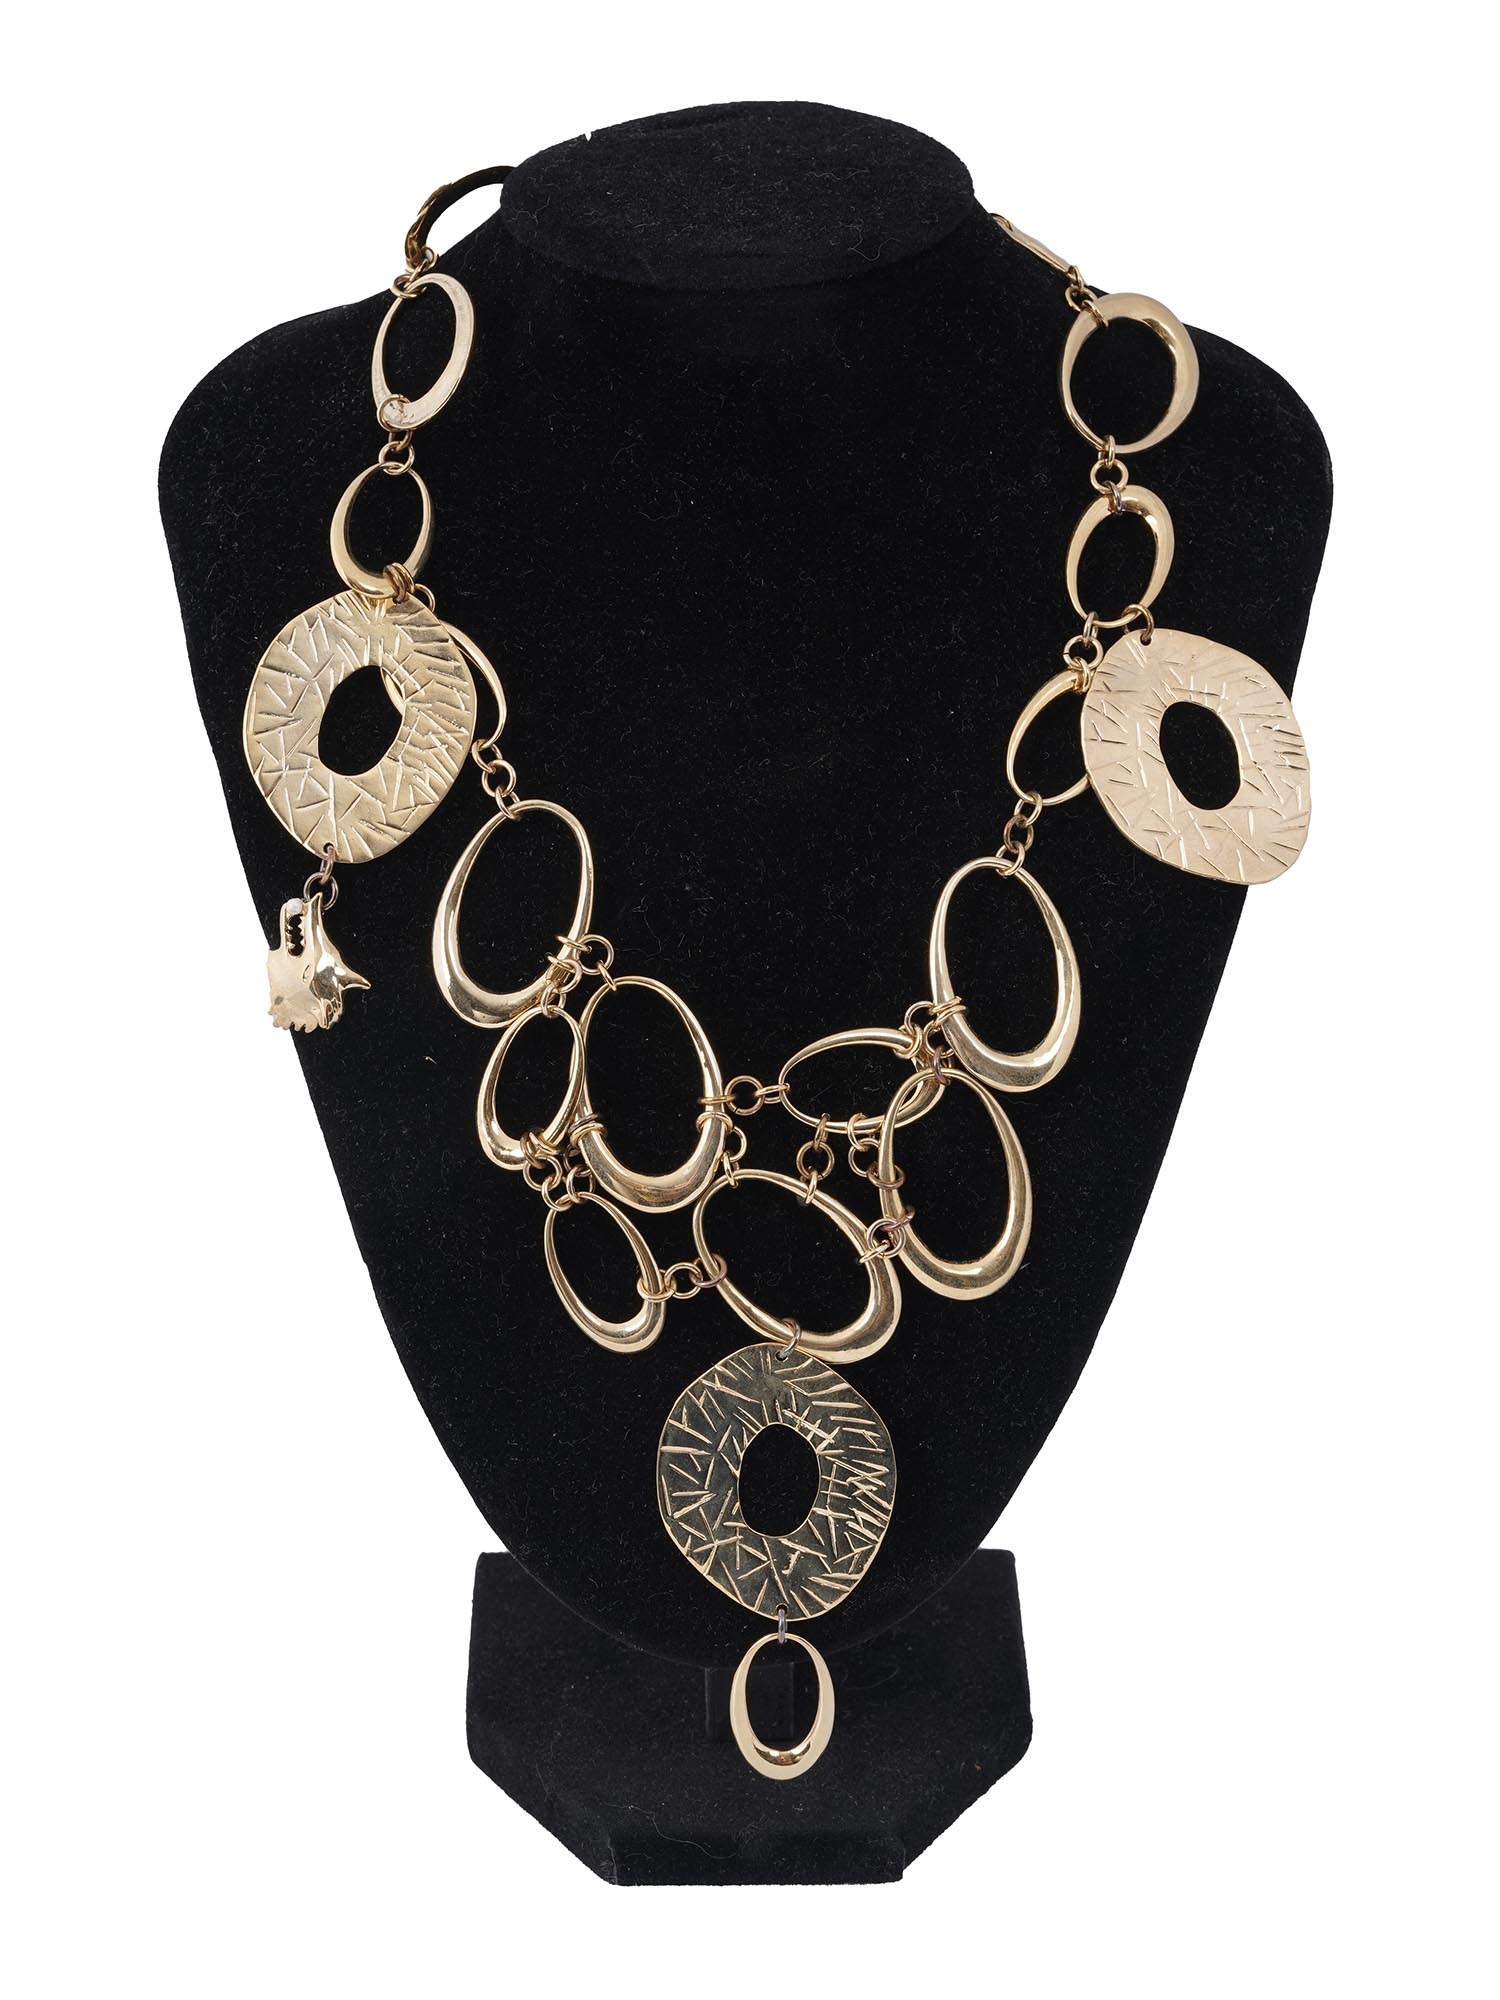 COLLECTION OF LUXURY COSTUME JEWELRY IOB PIC-2